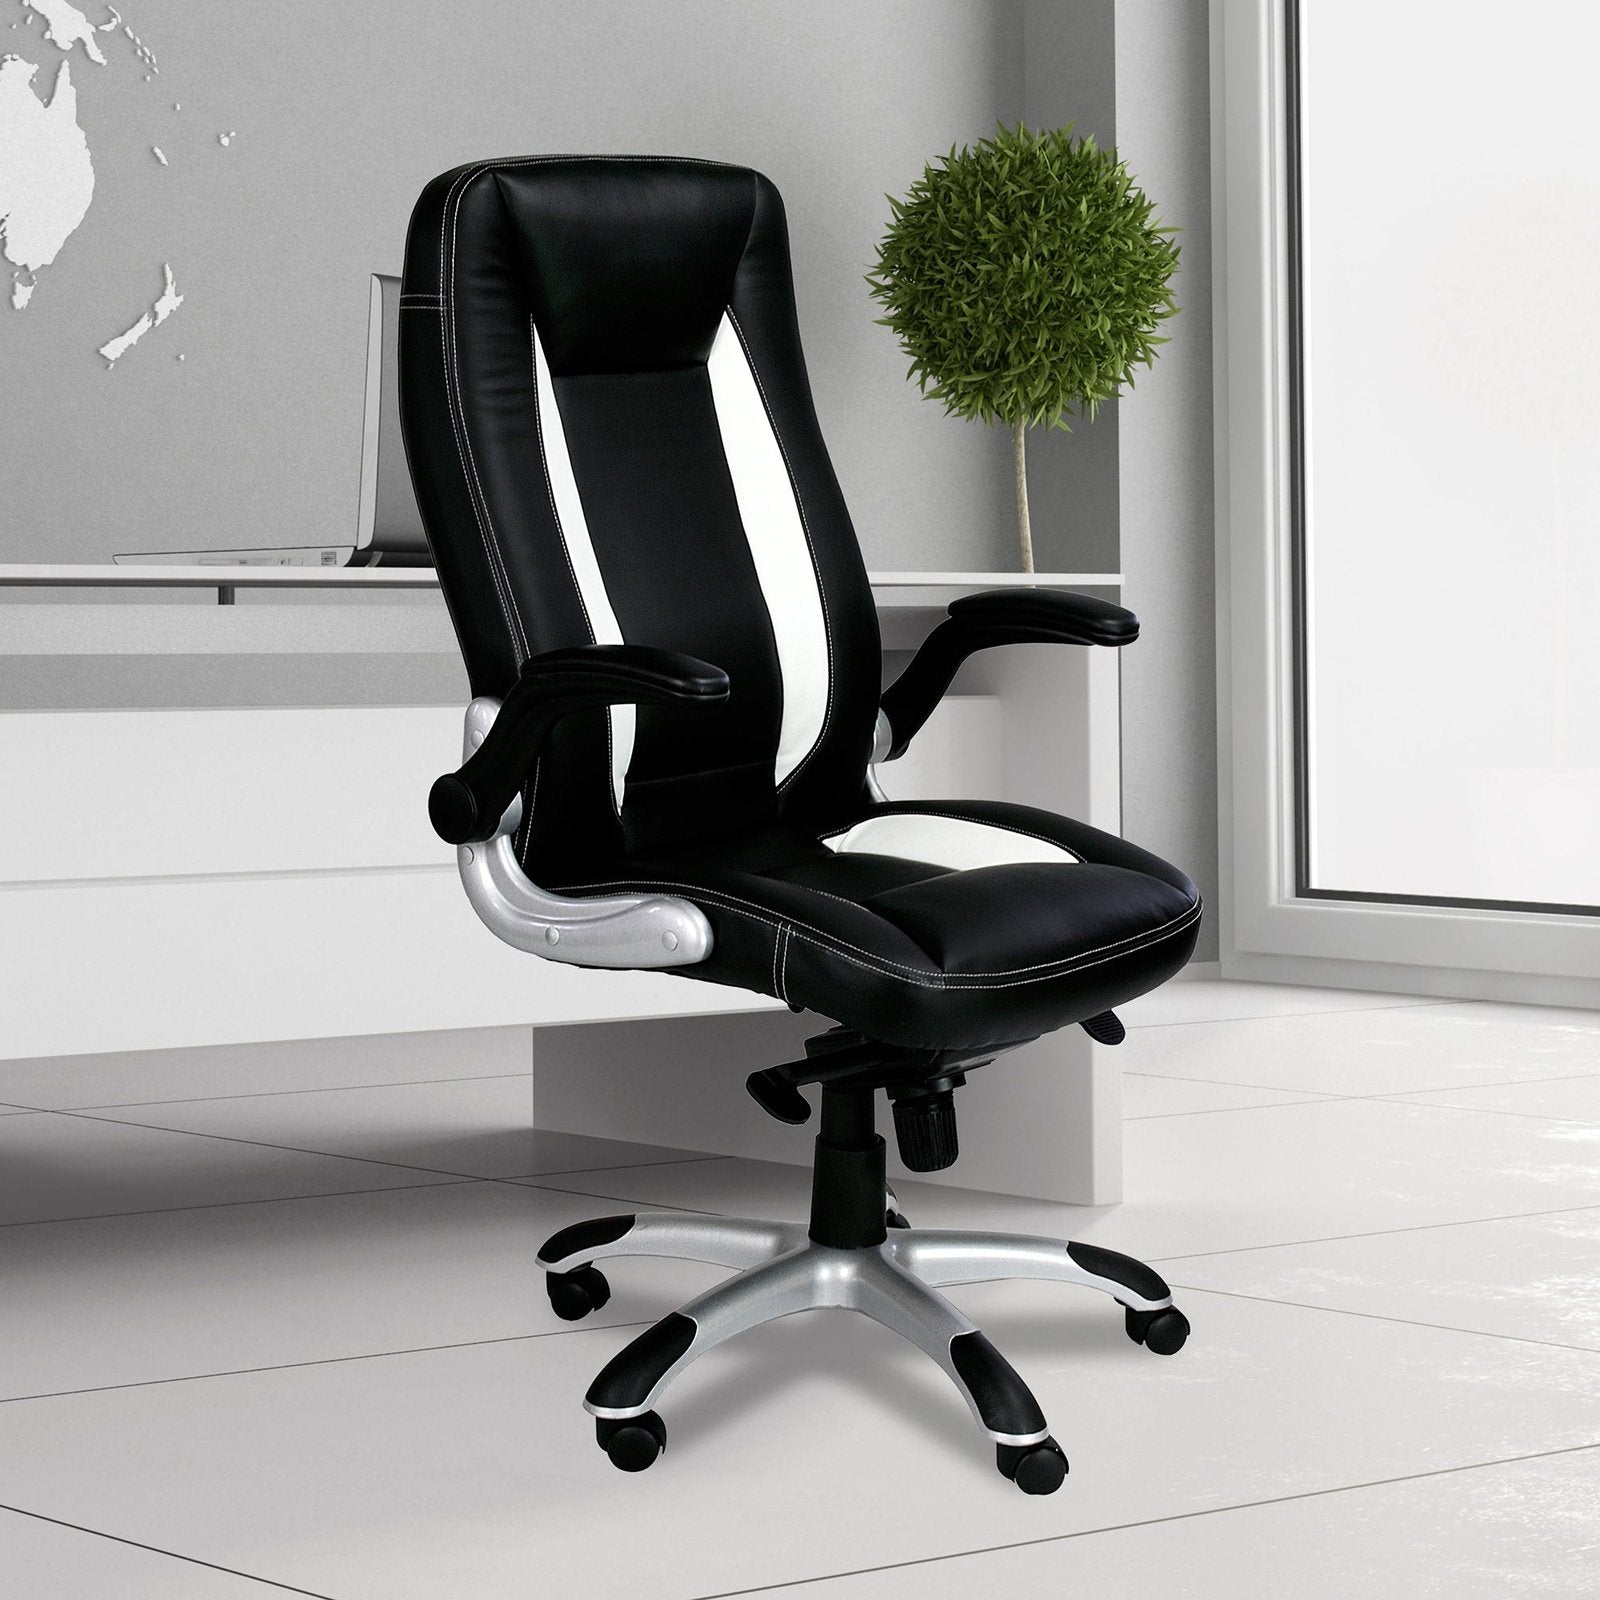 High Back Executive Chair with Folding Arms Satin Chrome Base - Black and White - Office Products Online